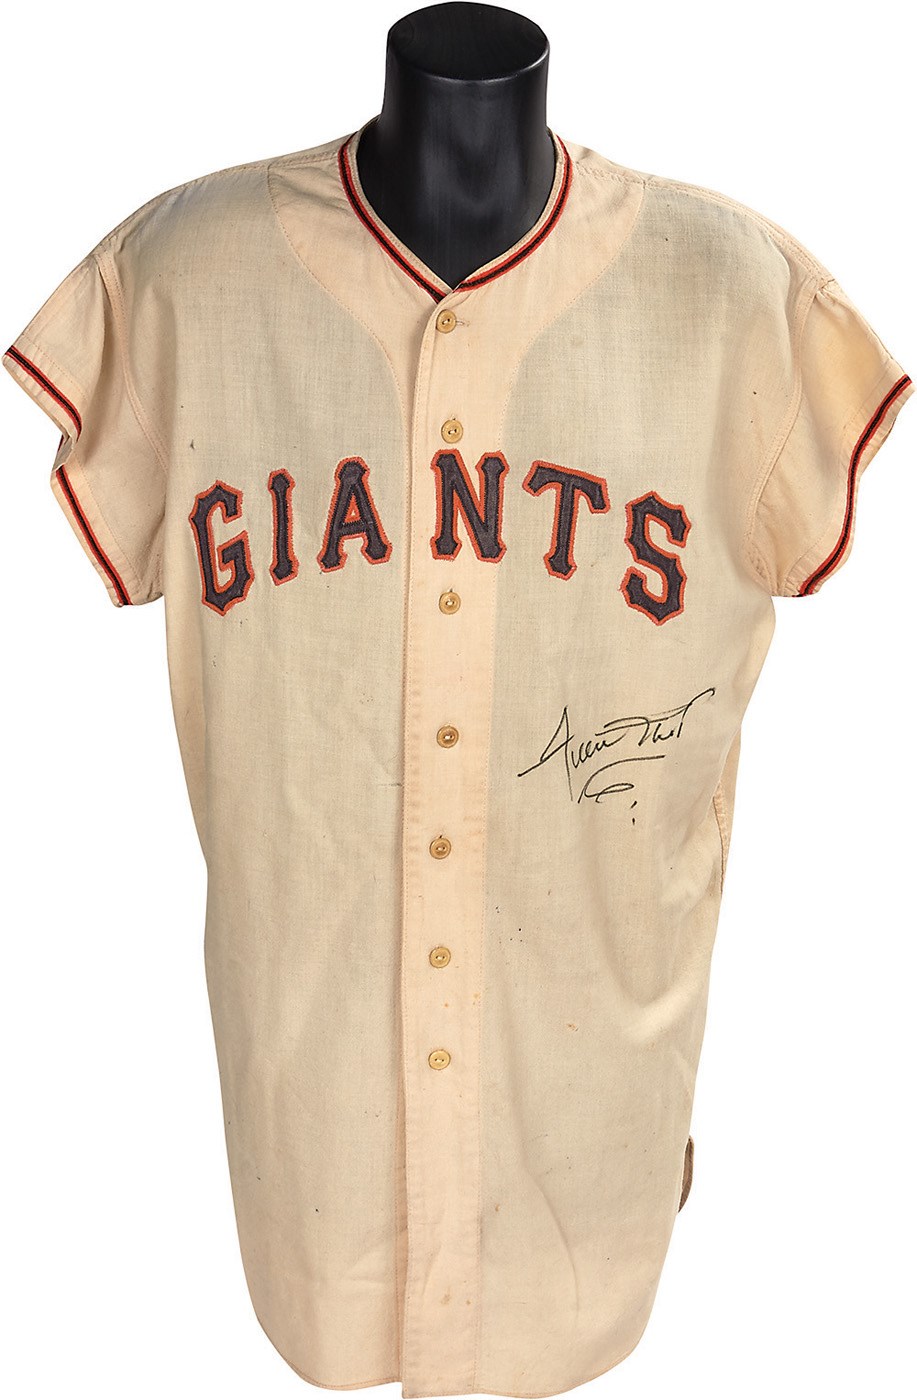 Baseball Equipment - 1957 Willie Mays New York Giants Game Worn Jersey from His Last Game at the Polo Grounds (MEARS 8)